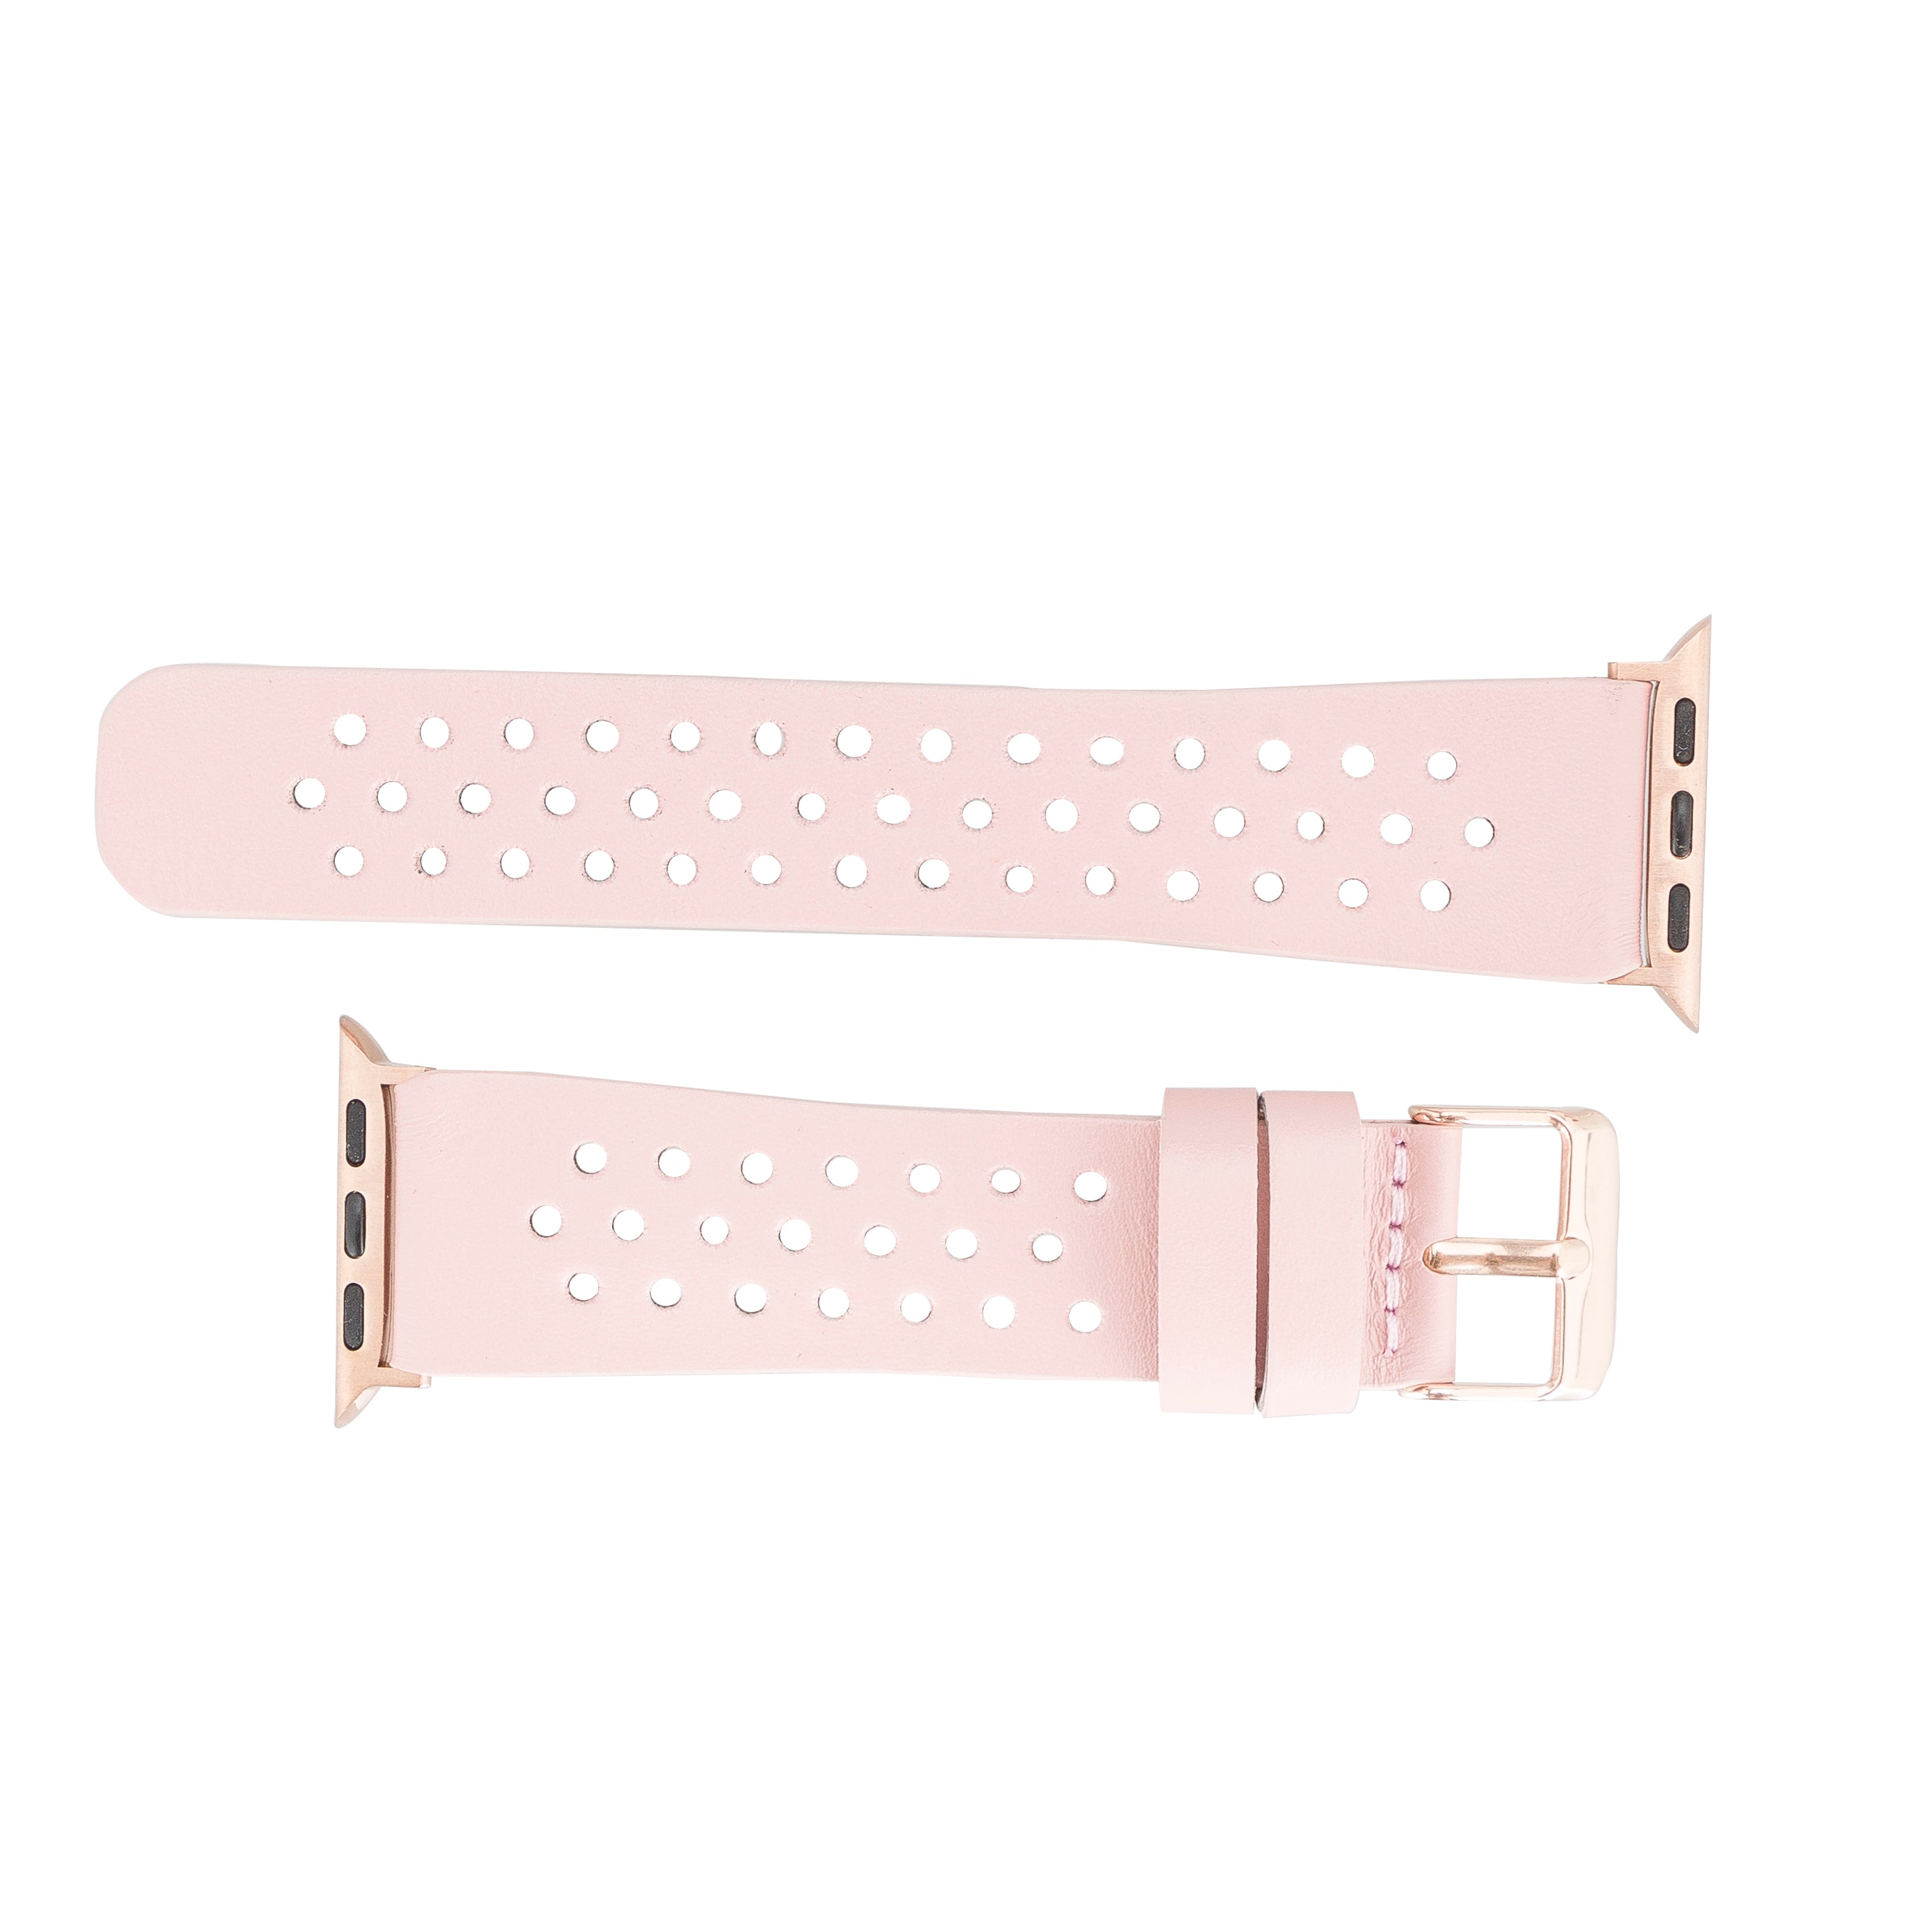 DelfiCase Chester Watch Band for Apple Watch & Fitbit Versa/Sense (Pink) 4